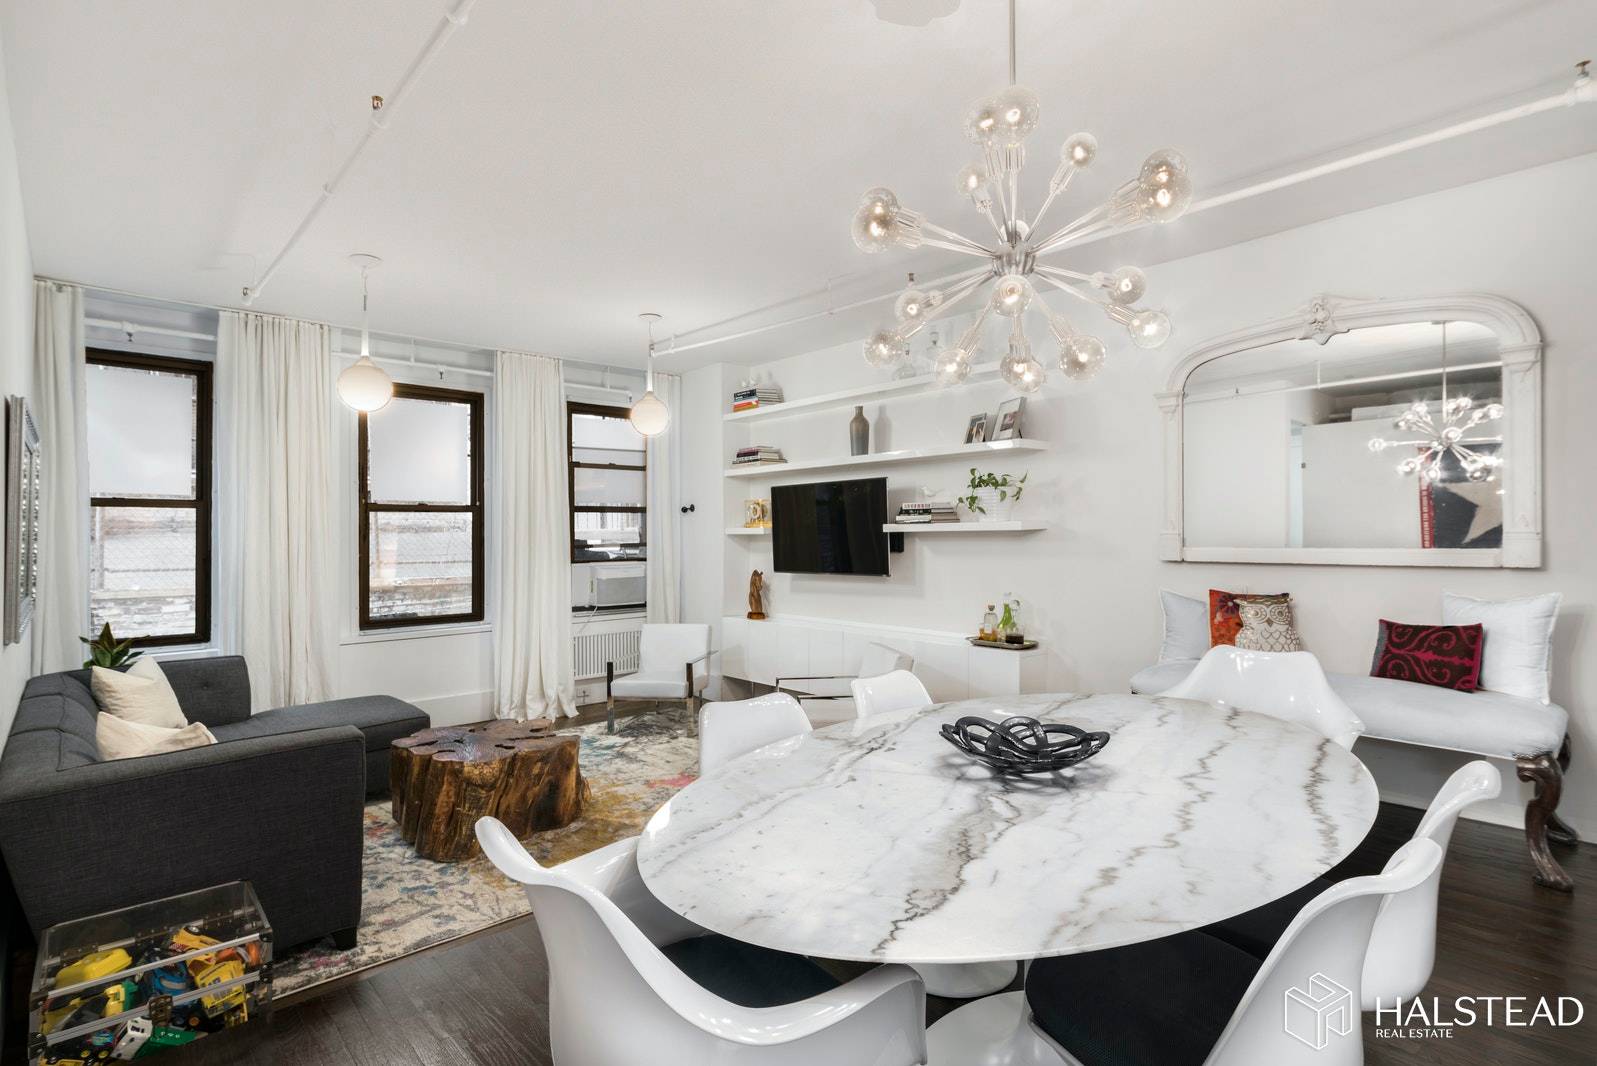 This tranquil, chic Flower District loft located between Chelsea and The Flatiron, and steps away from Madison Square Park offers true loft living with solid wood floors, high ceilings and ...